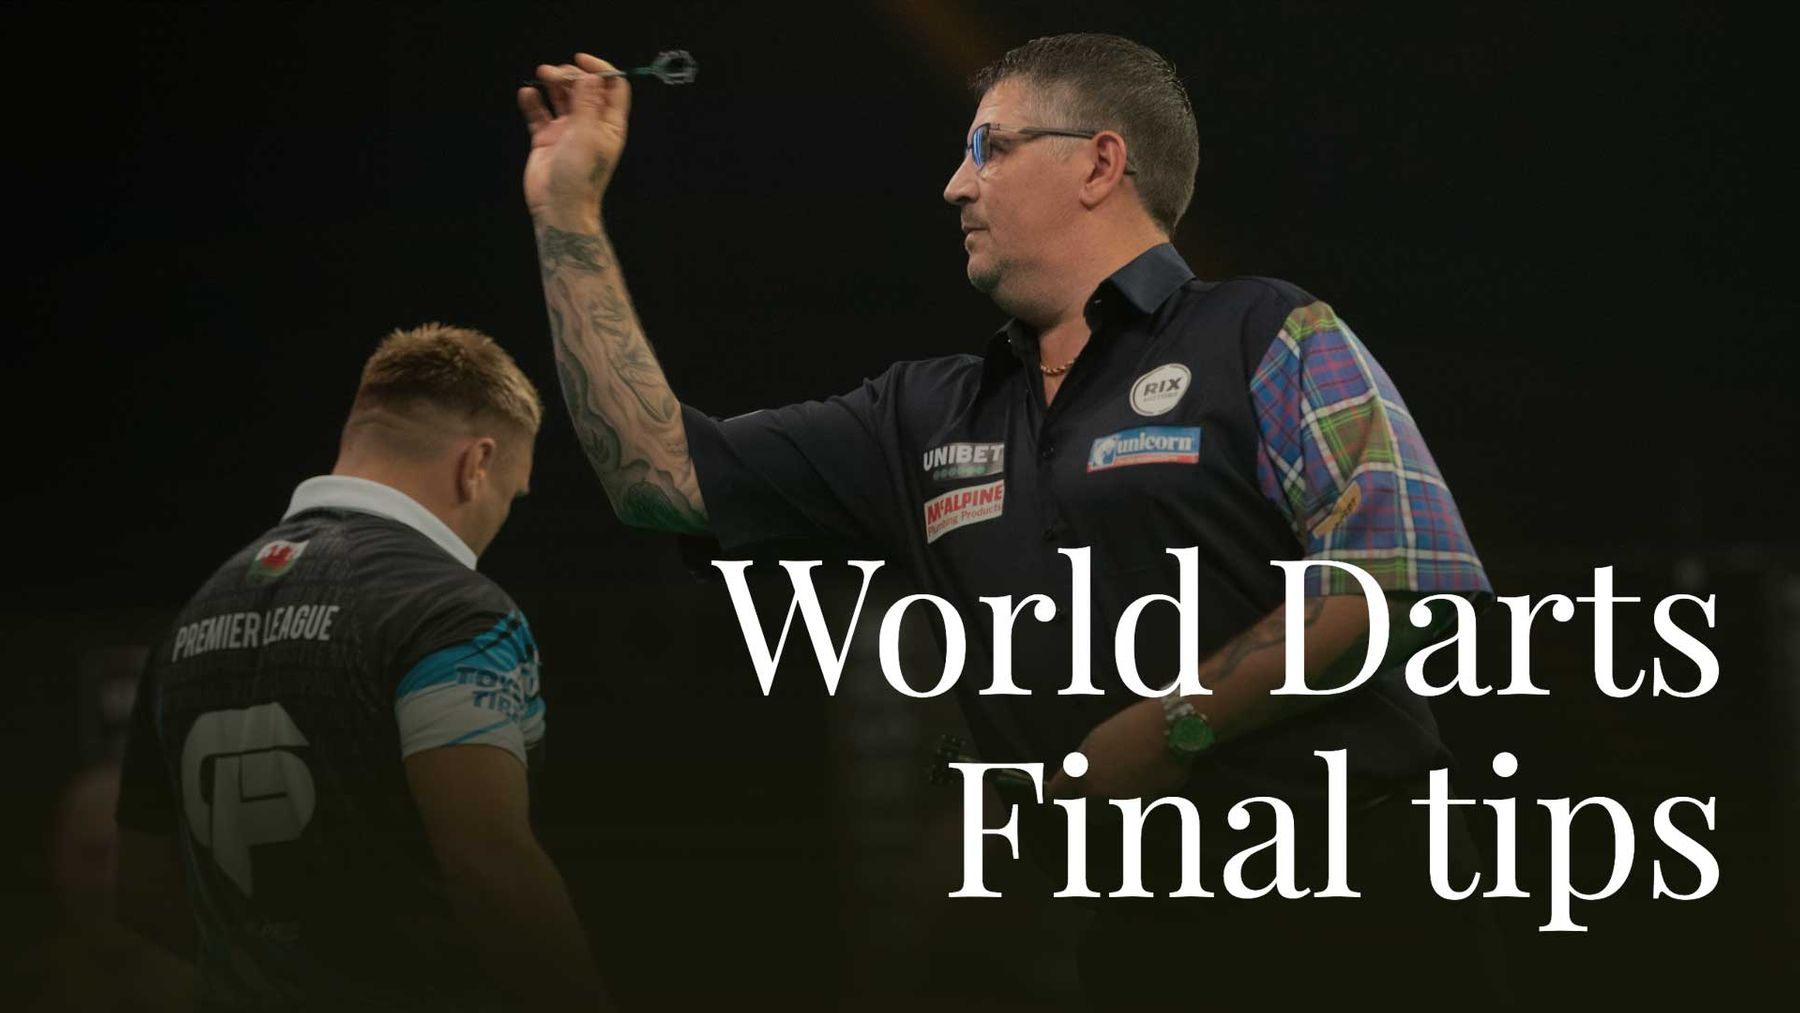 Gary Anderson ends three-year wait for PDC ranking title with